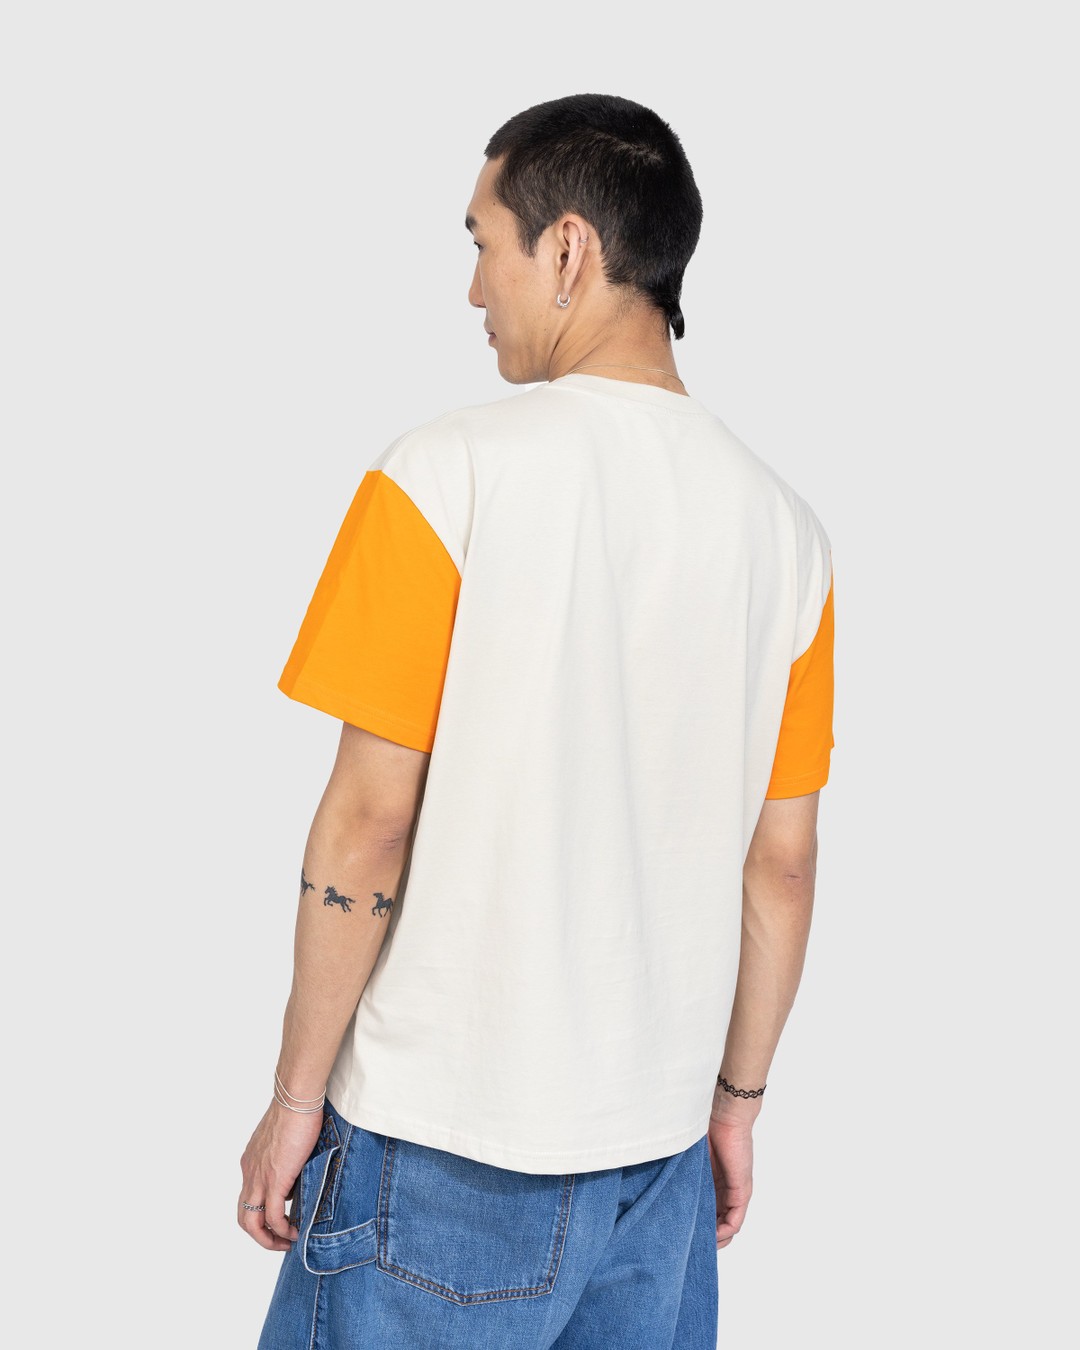 J.W. Anderson – Anchor Patch Contrast Sleeve T-Shirt - T-shirts - Orange - Image 3